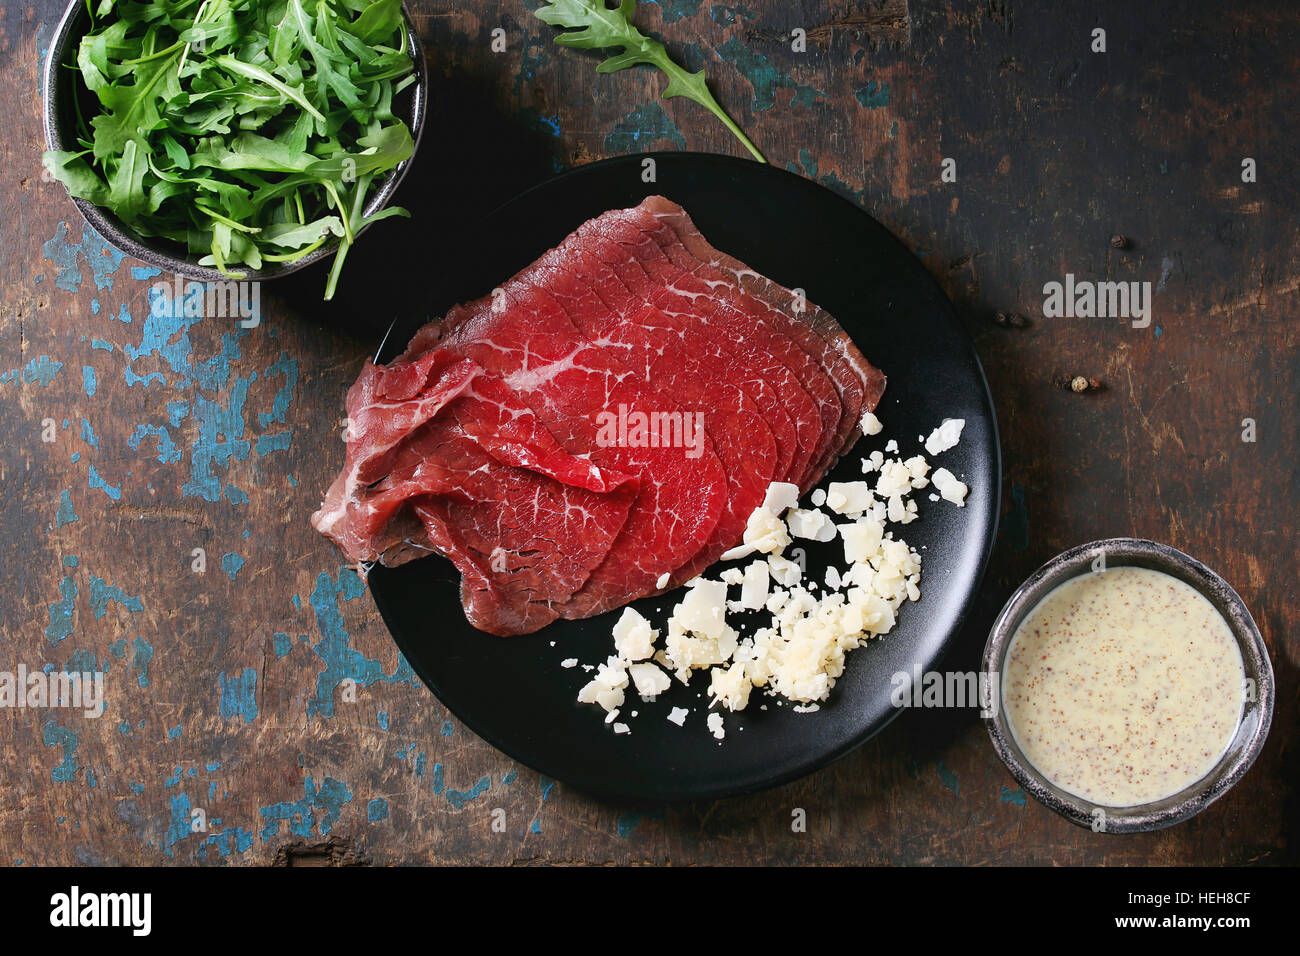 Ingredients for making carpaccio. Raw sliced beef on black plate, mustard and parmesan sauce, cheese, bowl of arugula over old dark texture background Stock Photo